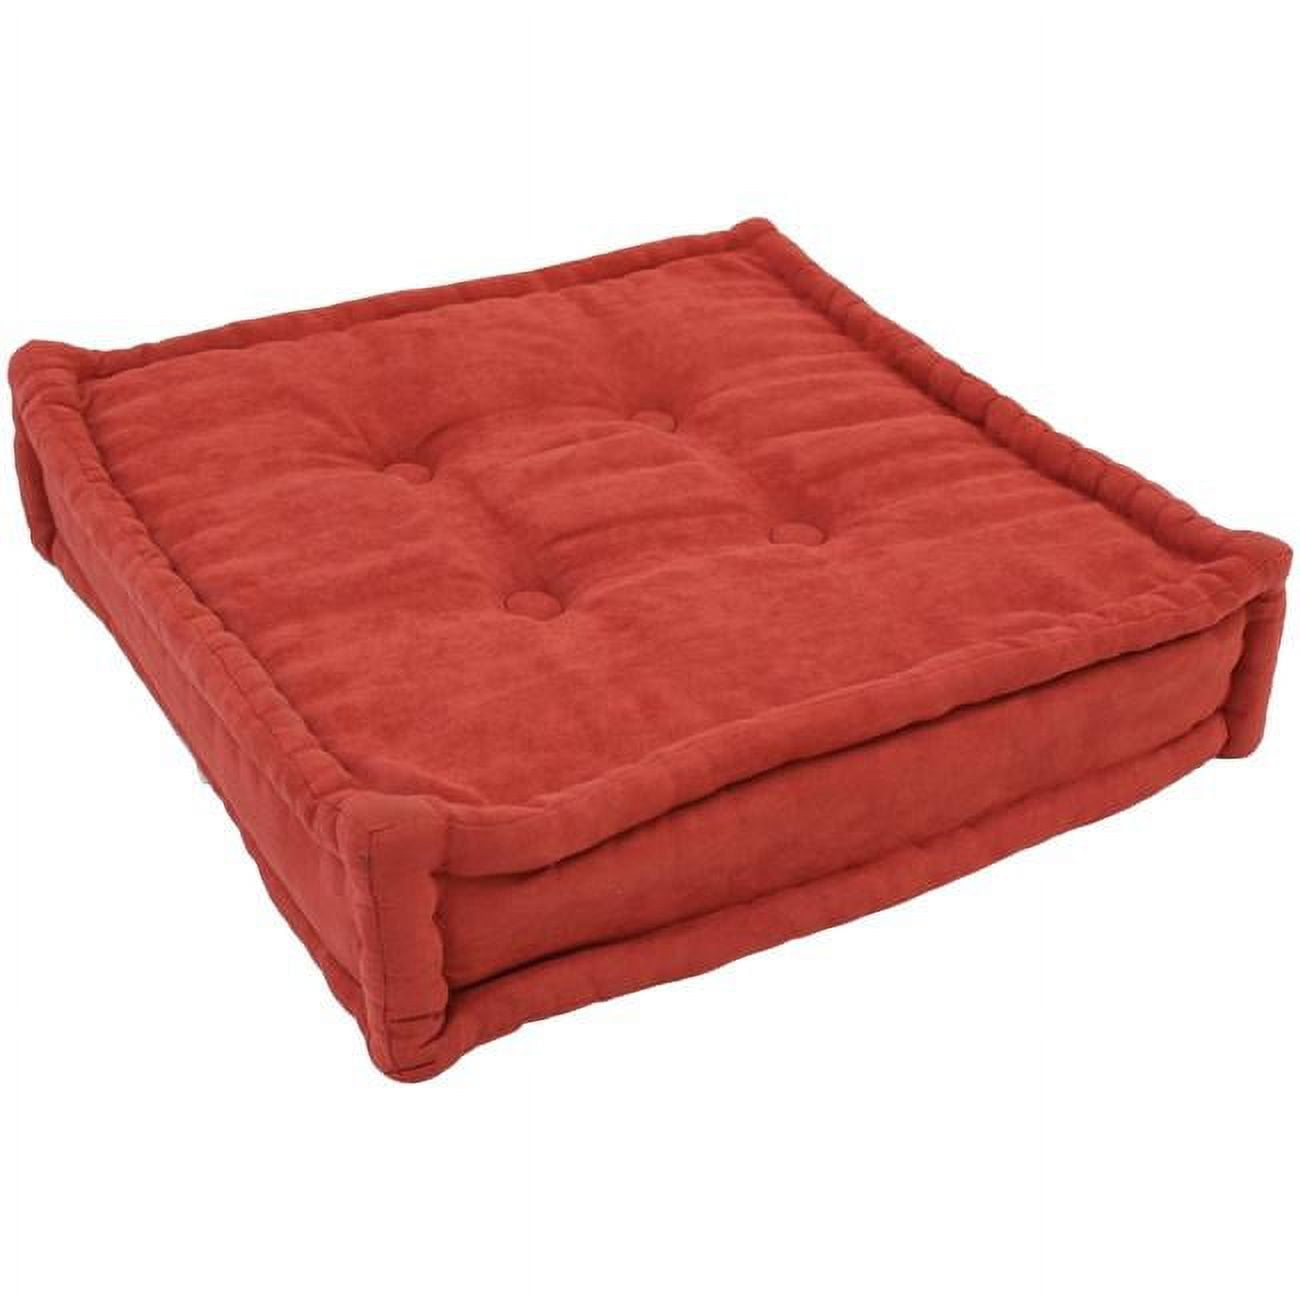 20 in. Square Floor Pillow with 4 Buttons, 0.38 in. Cotton Welt Cording & Carry Handle, Cardinal Red -  Pisos, PI2802746